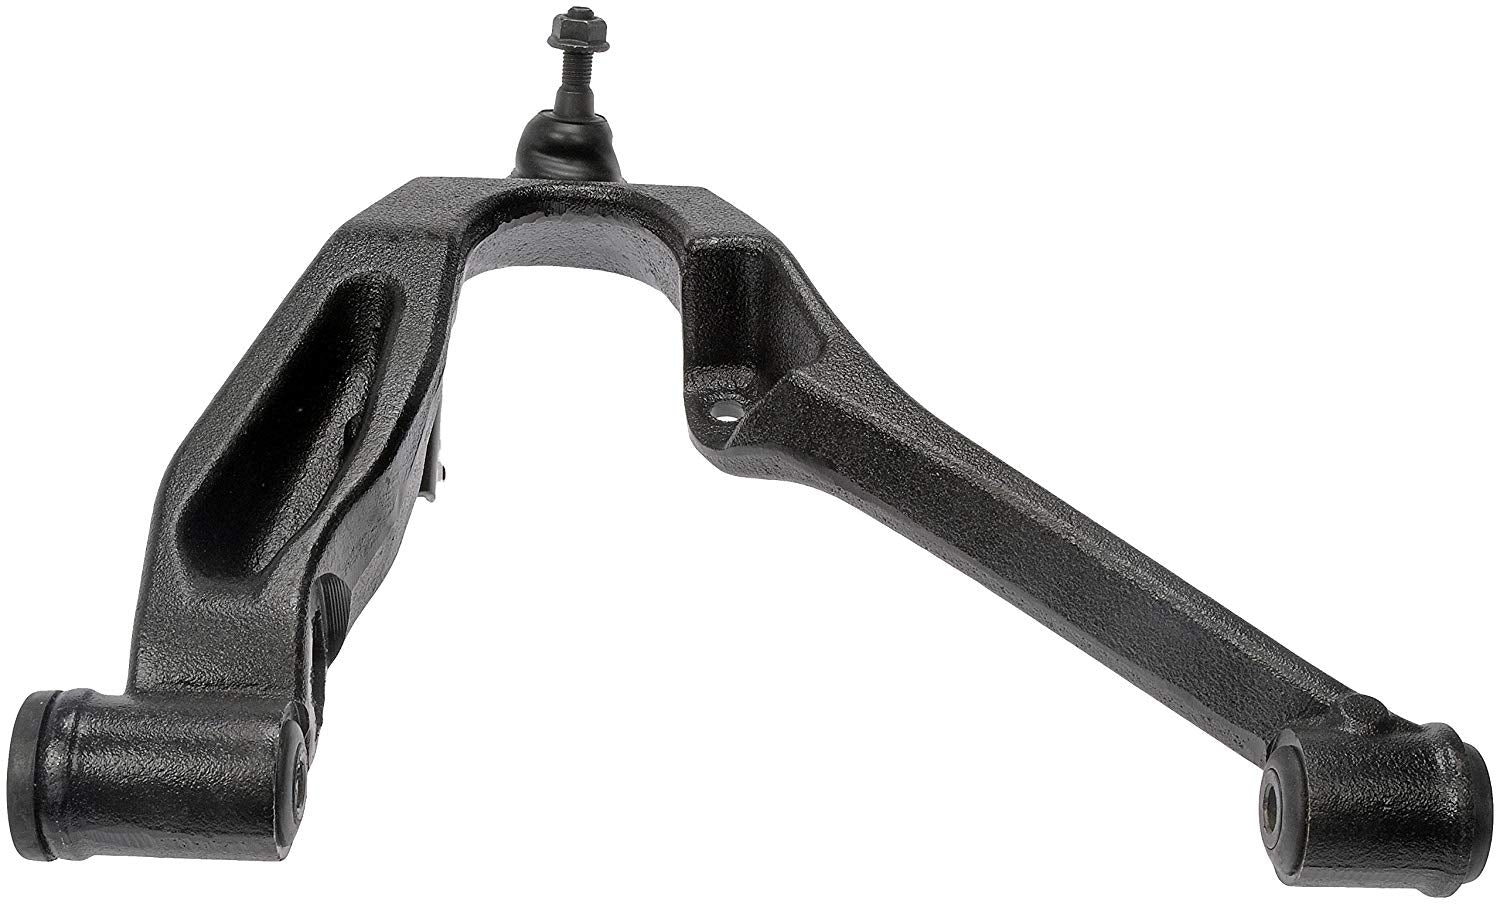 Dorman 521-878 Front Right Lower Suspension Control Arm and Ball Joint Assembly for Select Chevrolet/GMC/Hummer Models